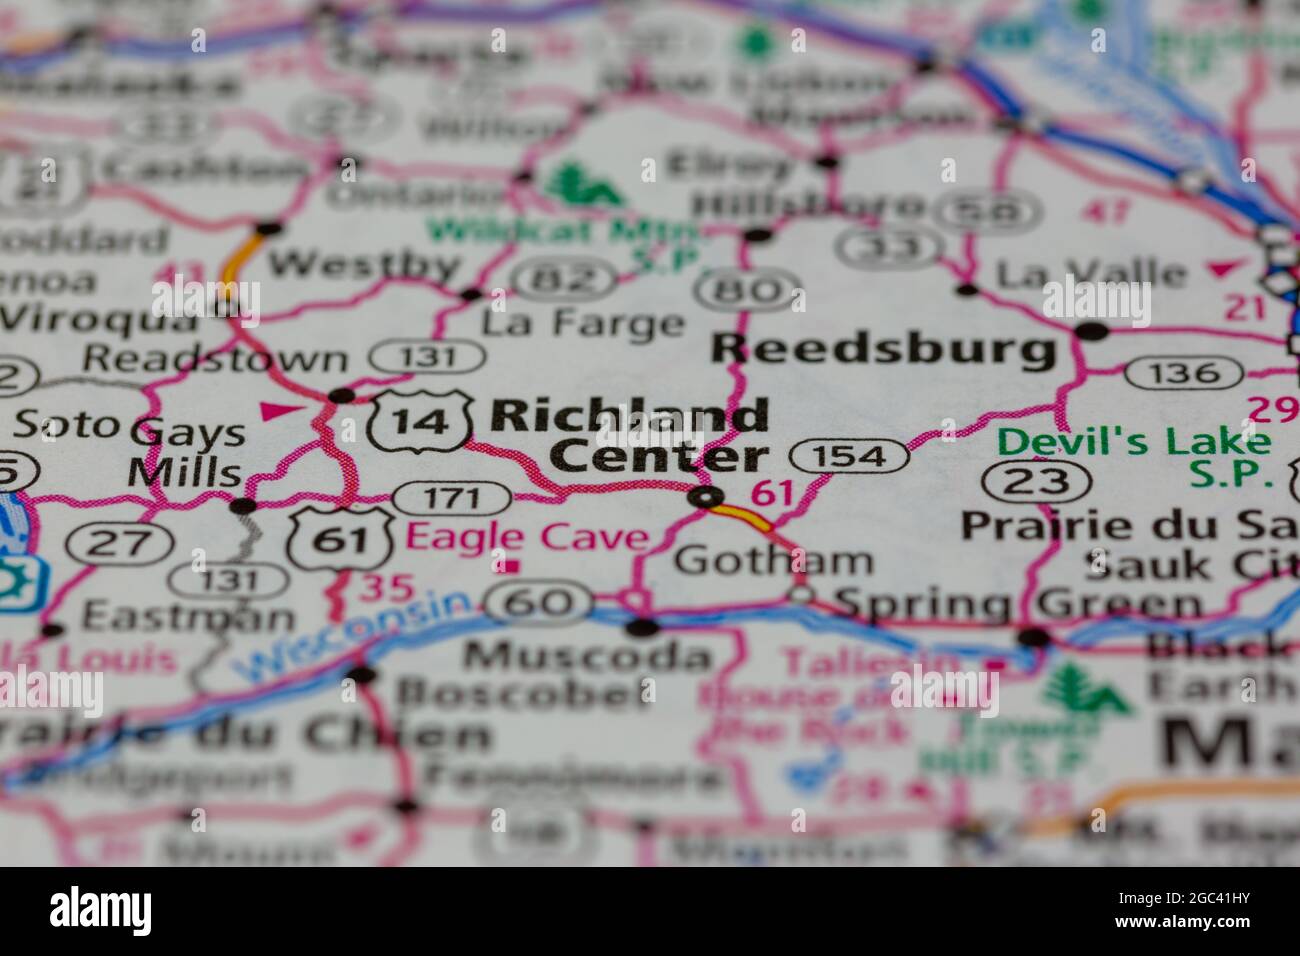 Richland Center Wisconsin USA shown on a road map or Geography map Stock Photo